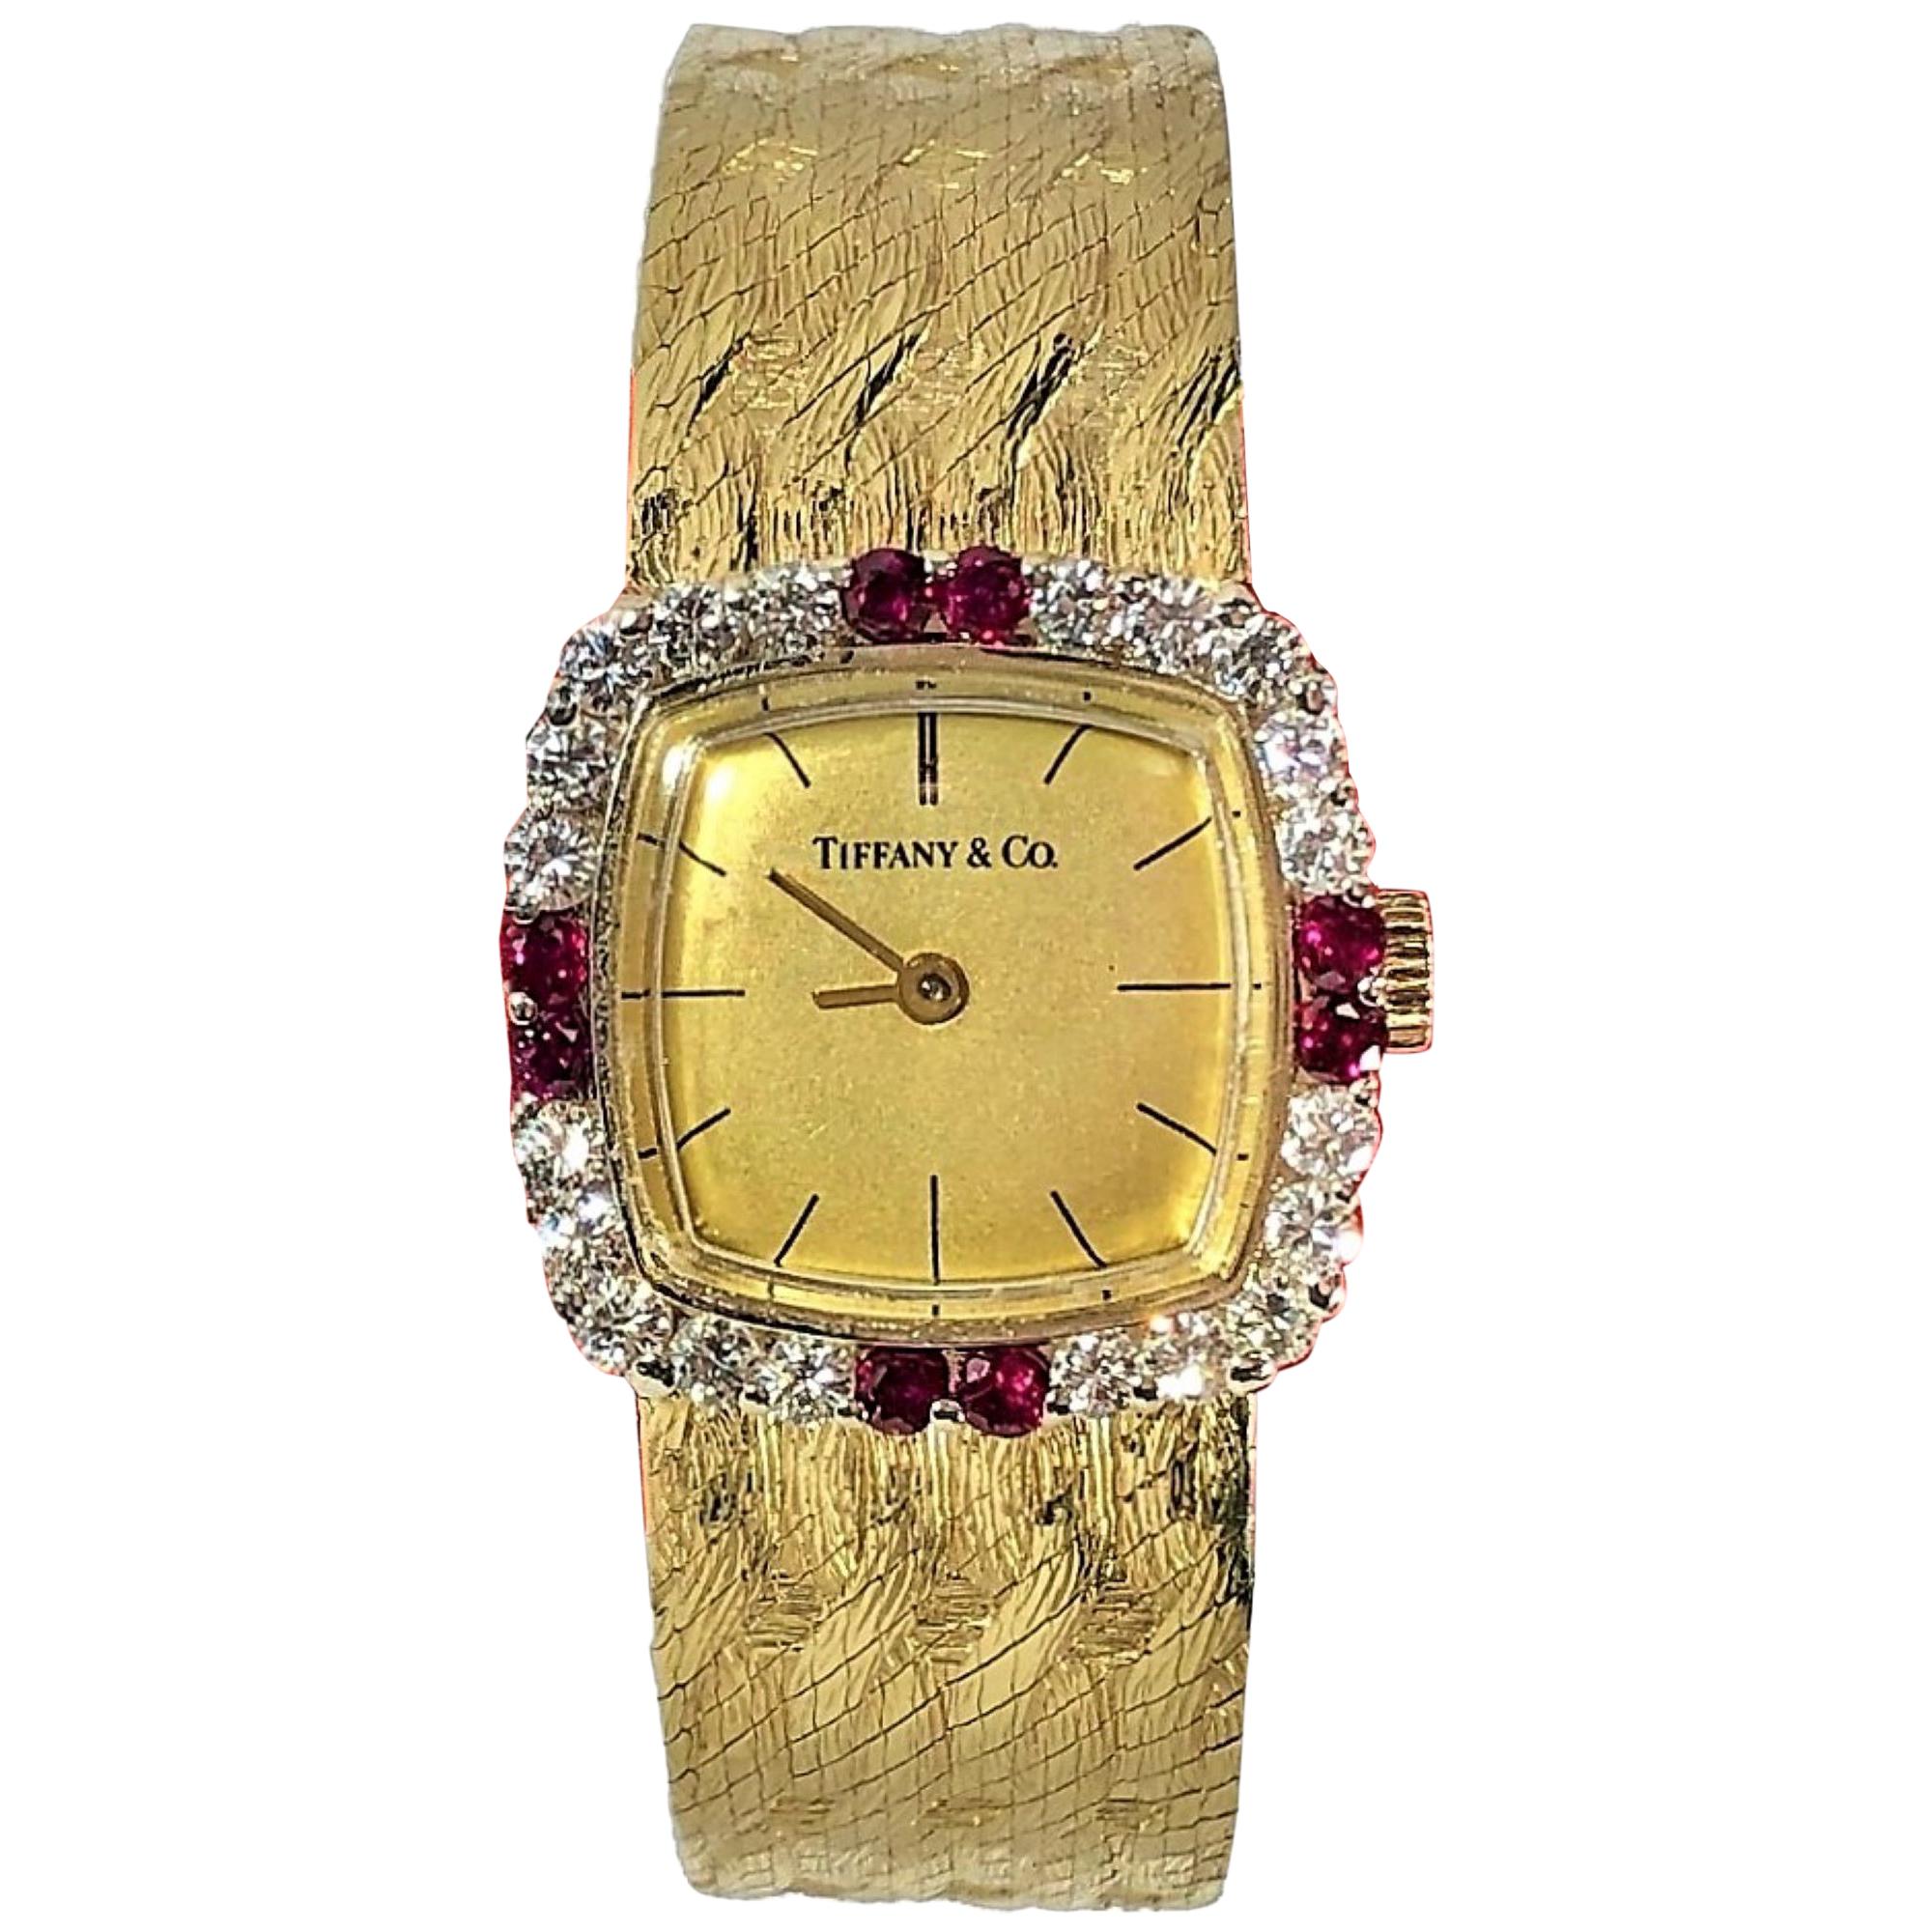 Tiffany & Co. Cushion Shaped Diamond and Ruby Bezel Watch in Yellow Gold For Sale